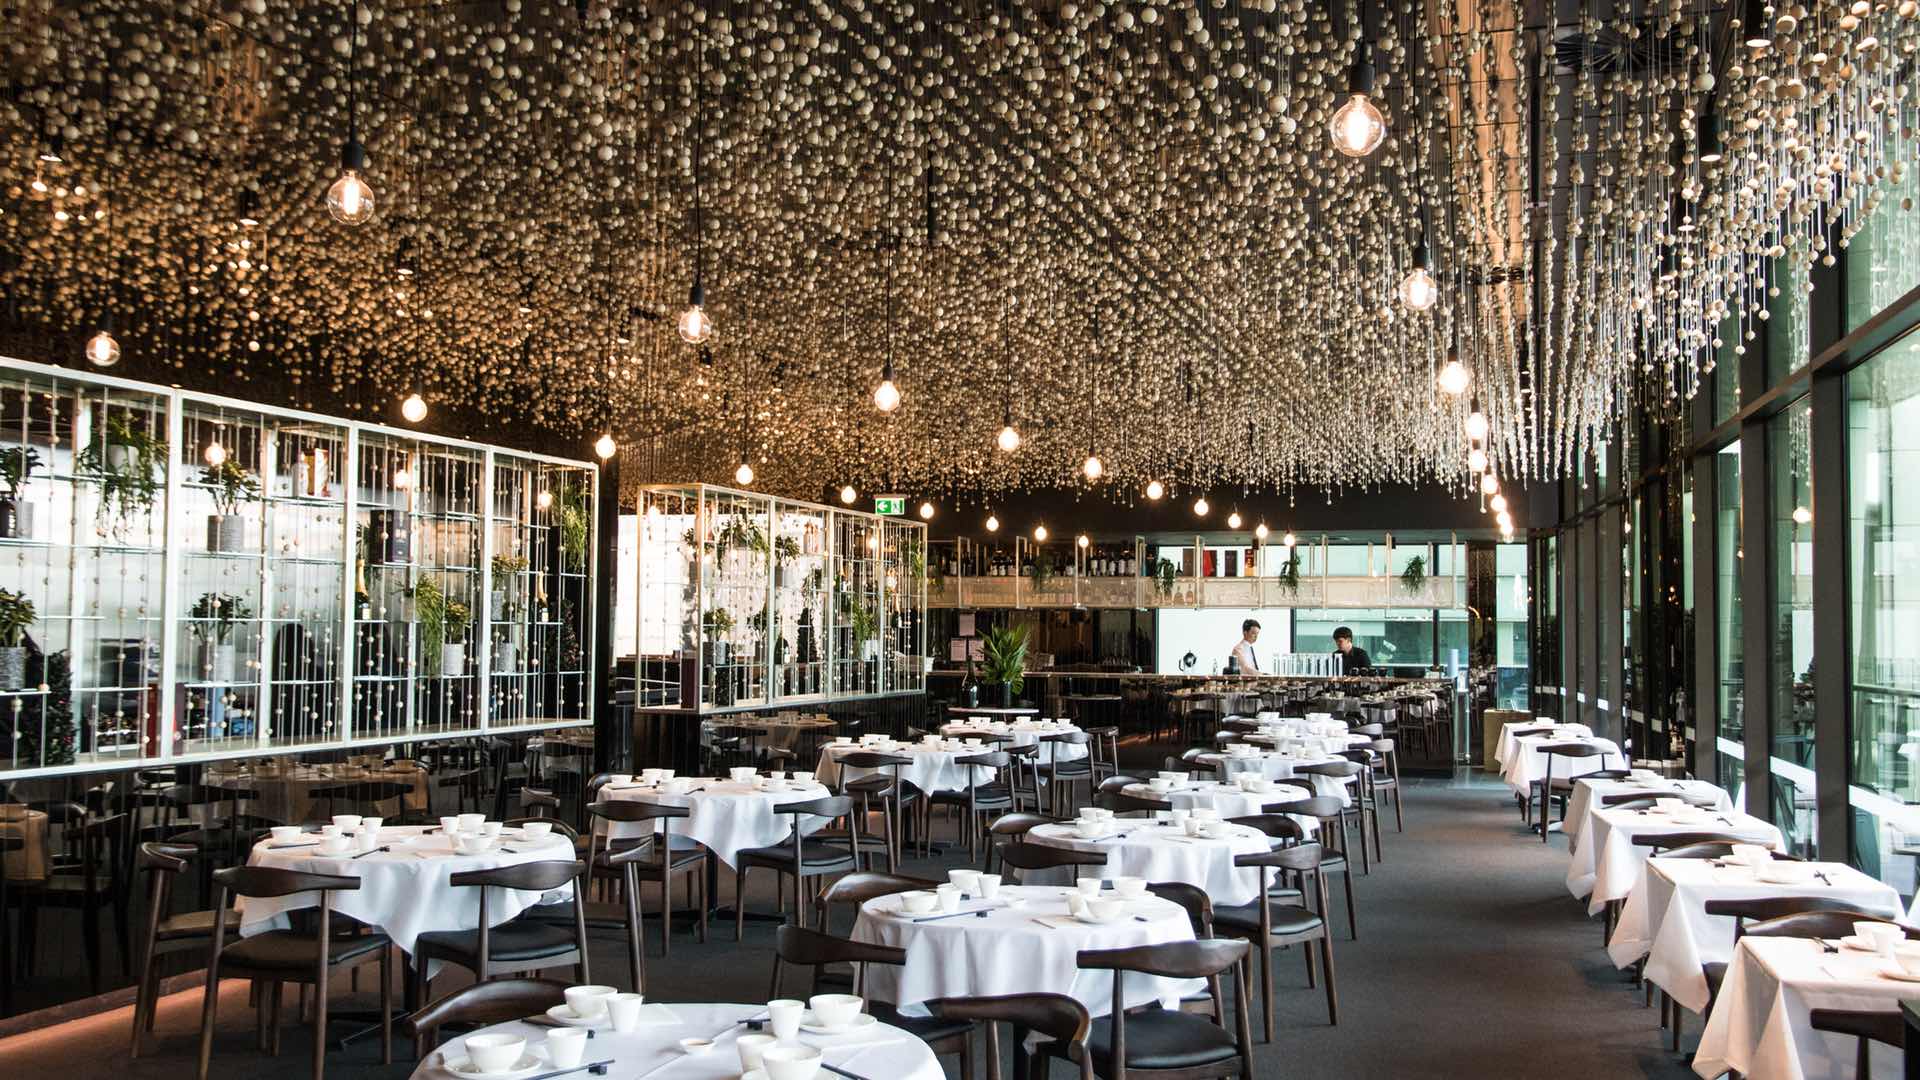 Chadstone Has Just Scored Two Fancy New Restaurants from Michelin-Starred Chefs